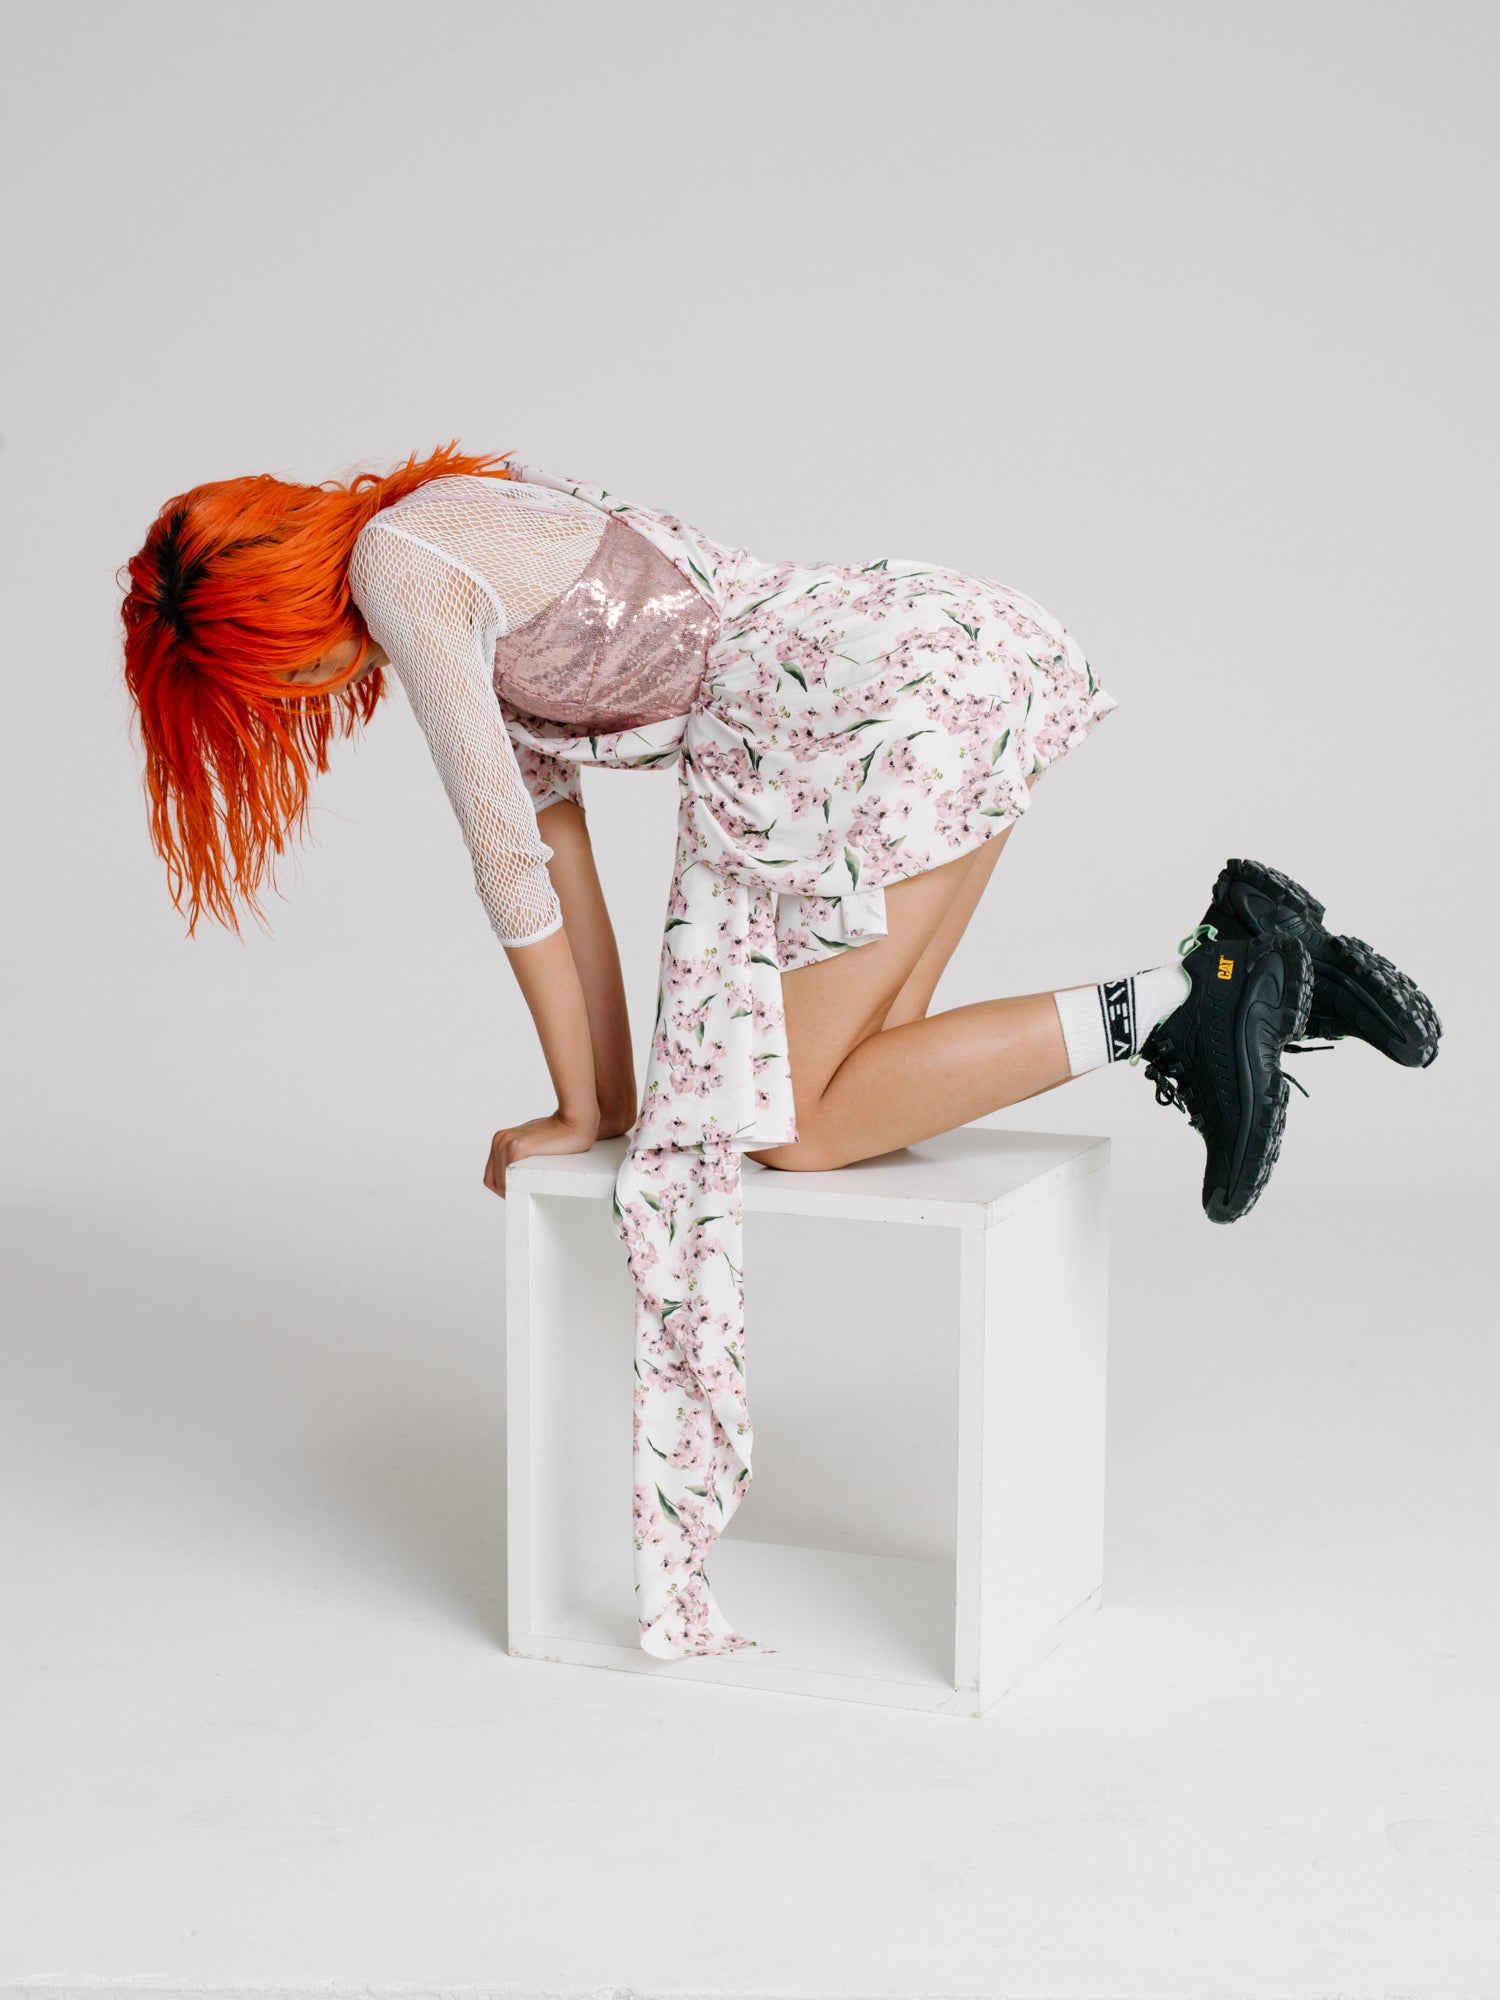 Red hair girl on a chair wearing a floral dress